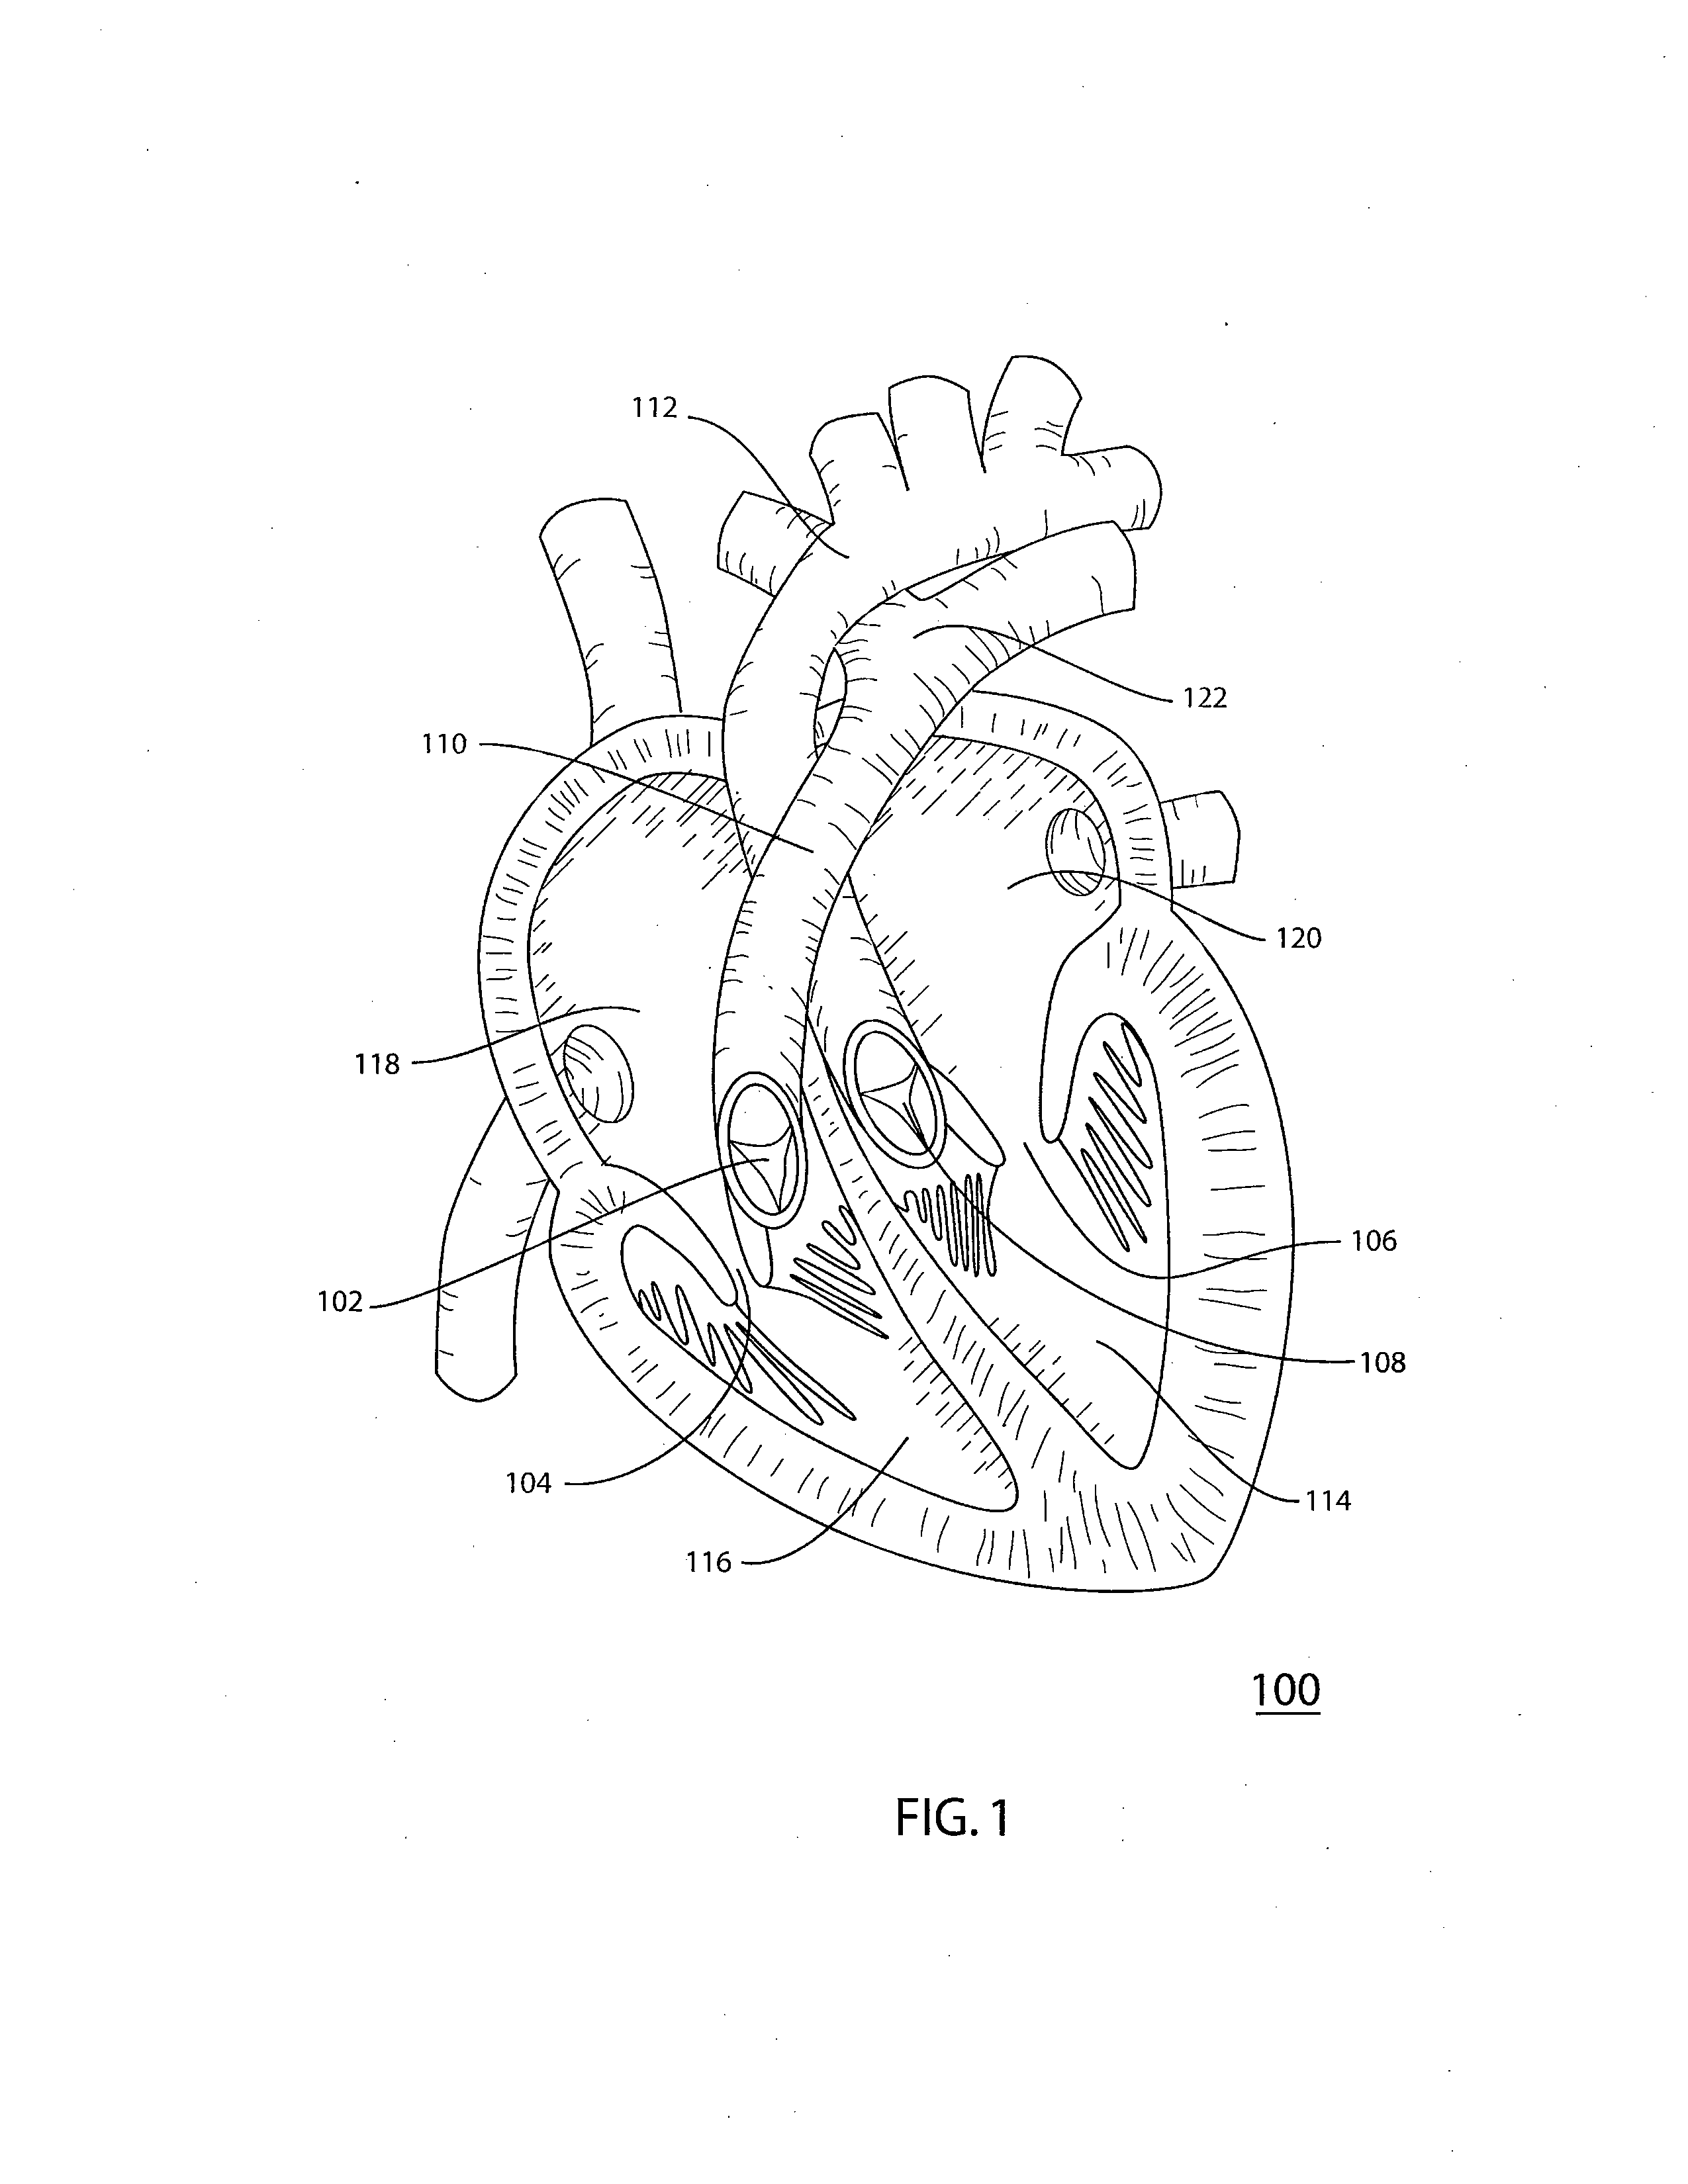 Stent Foundation for Placement of a Stented Valve